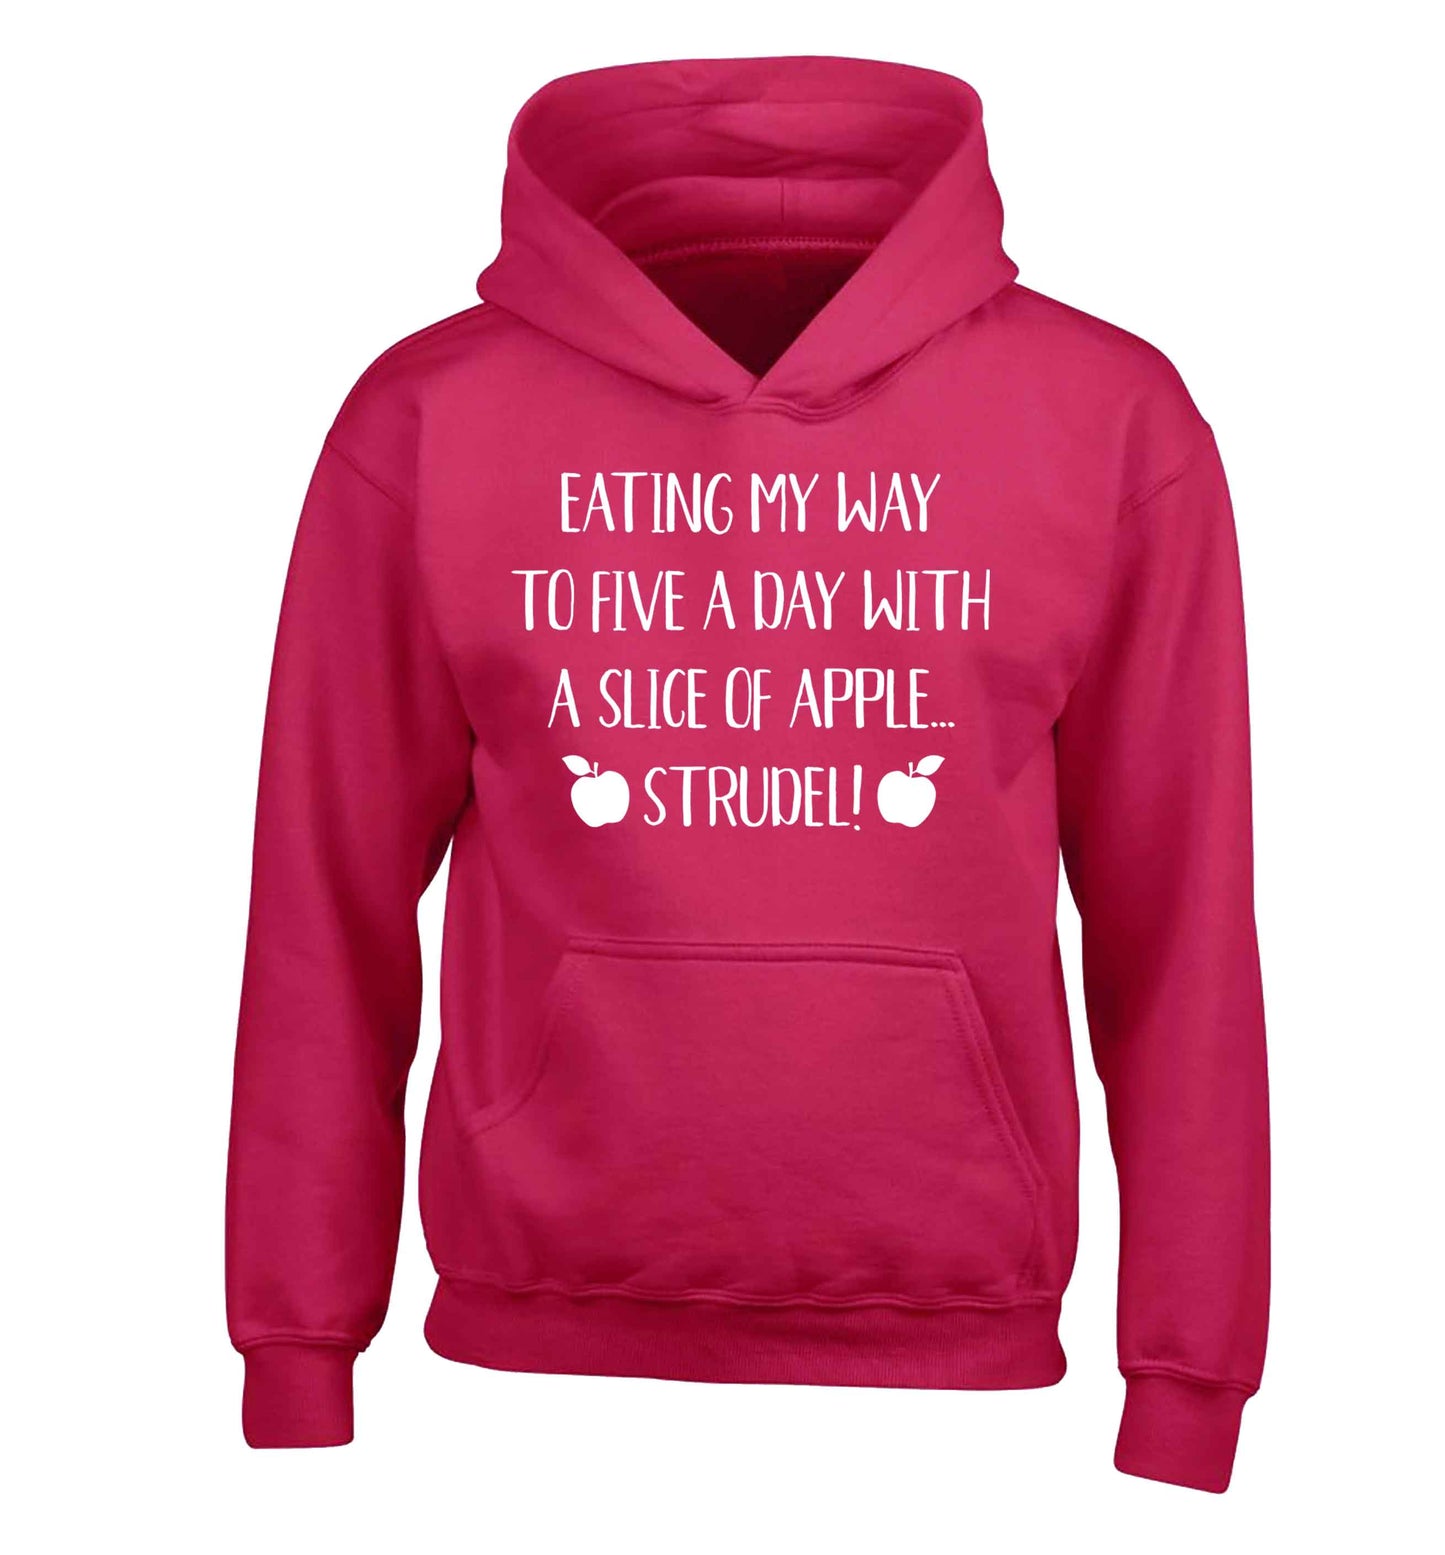 Eating my way to five a day with a slice of apple strudel children's pink hoodie 12-13 Years